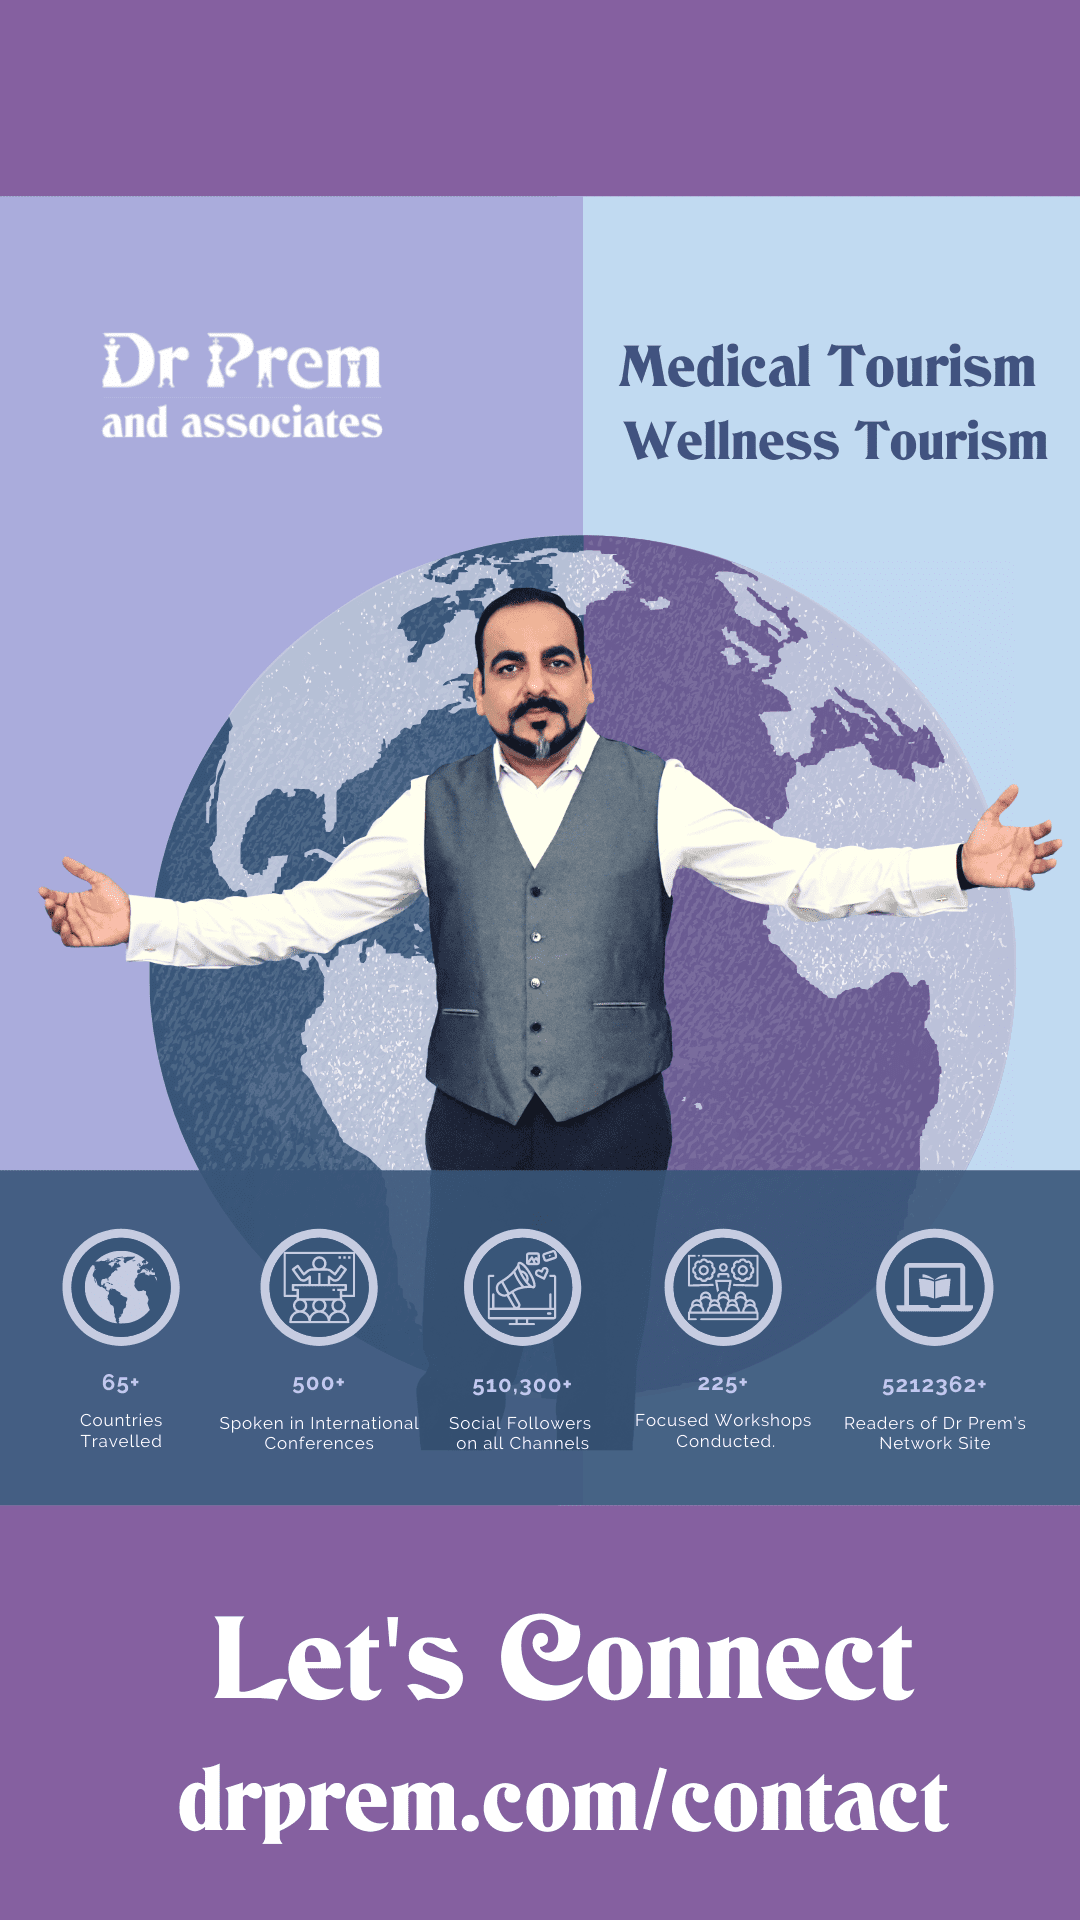 Why should you start your medical tourism and wellness tourism business now - 14